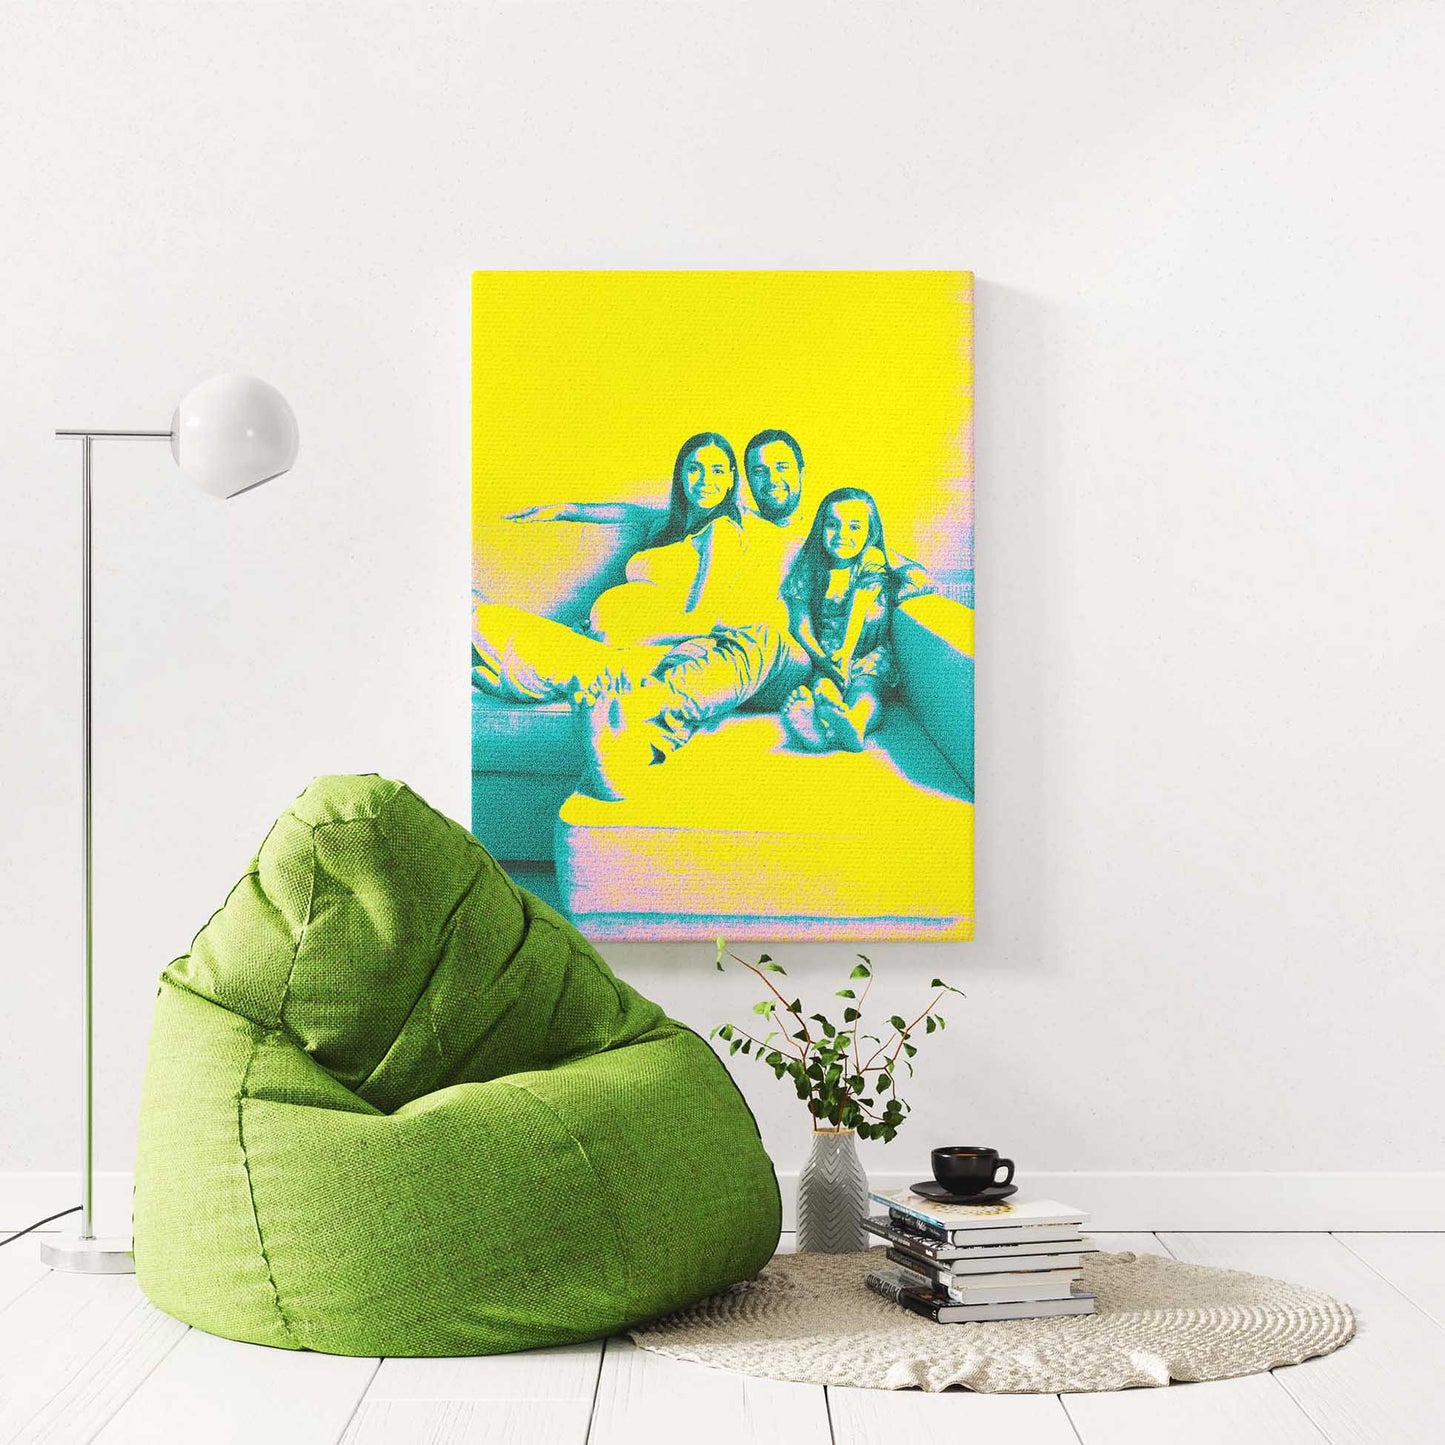 Transform your walls into a stunning display of art with the Personalised Acid Yellow Canvas